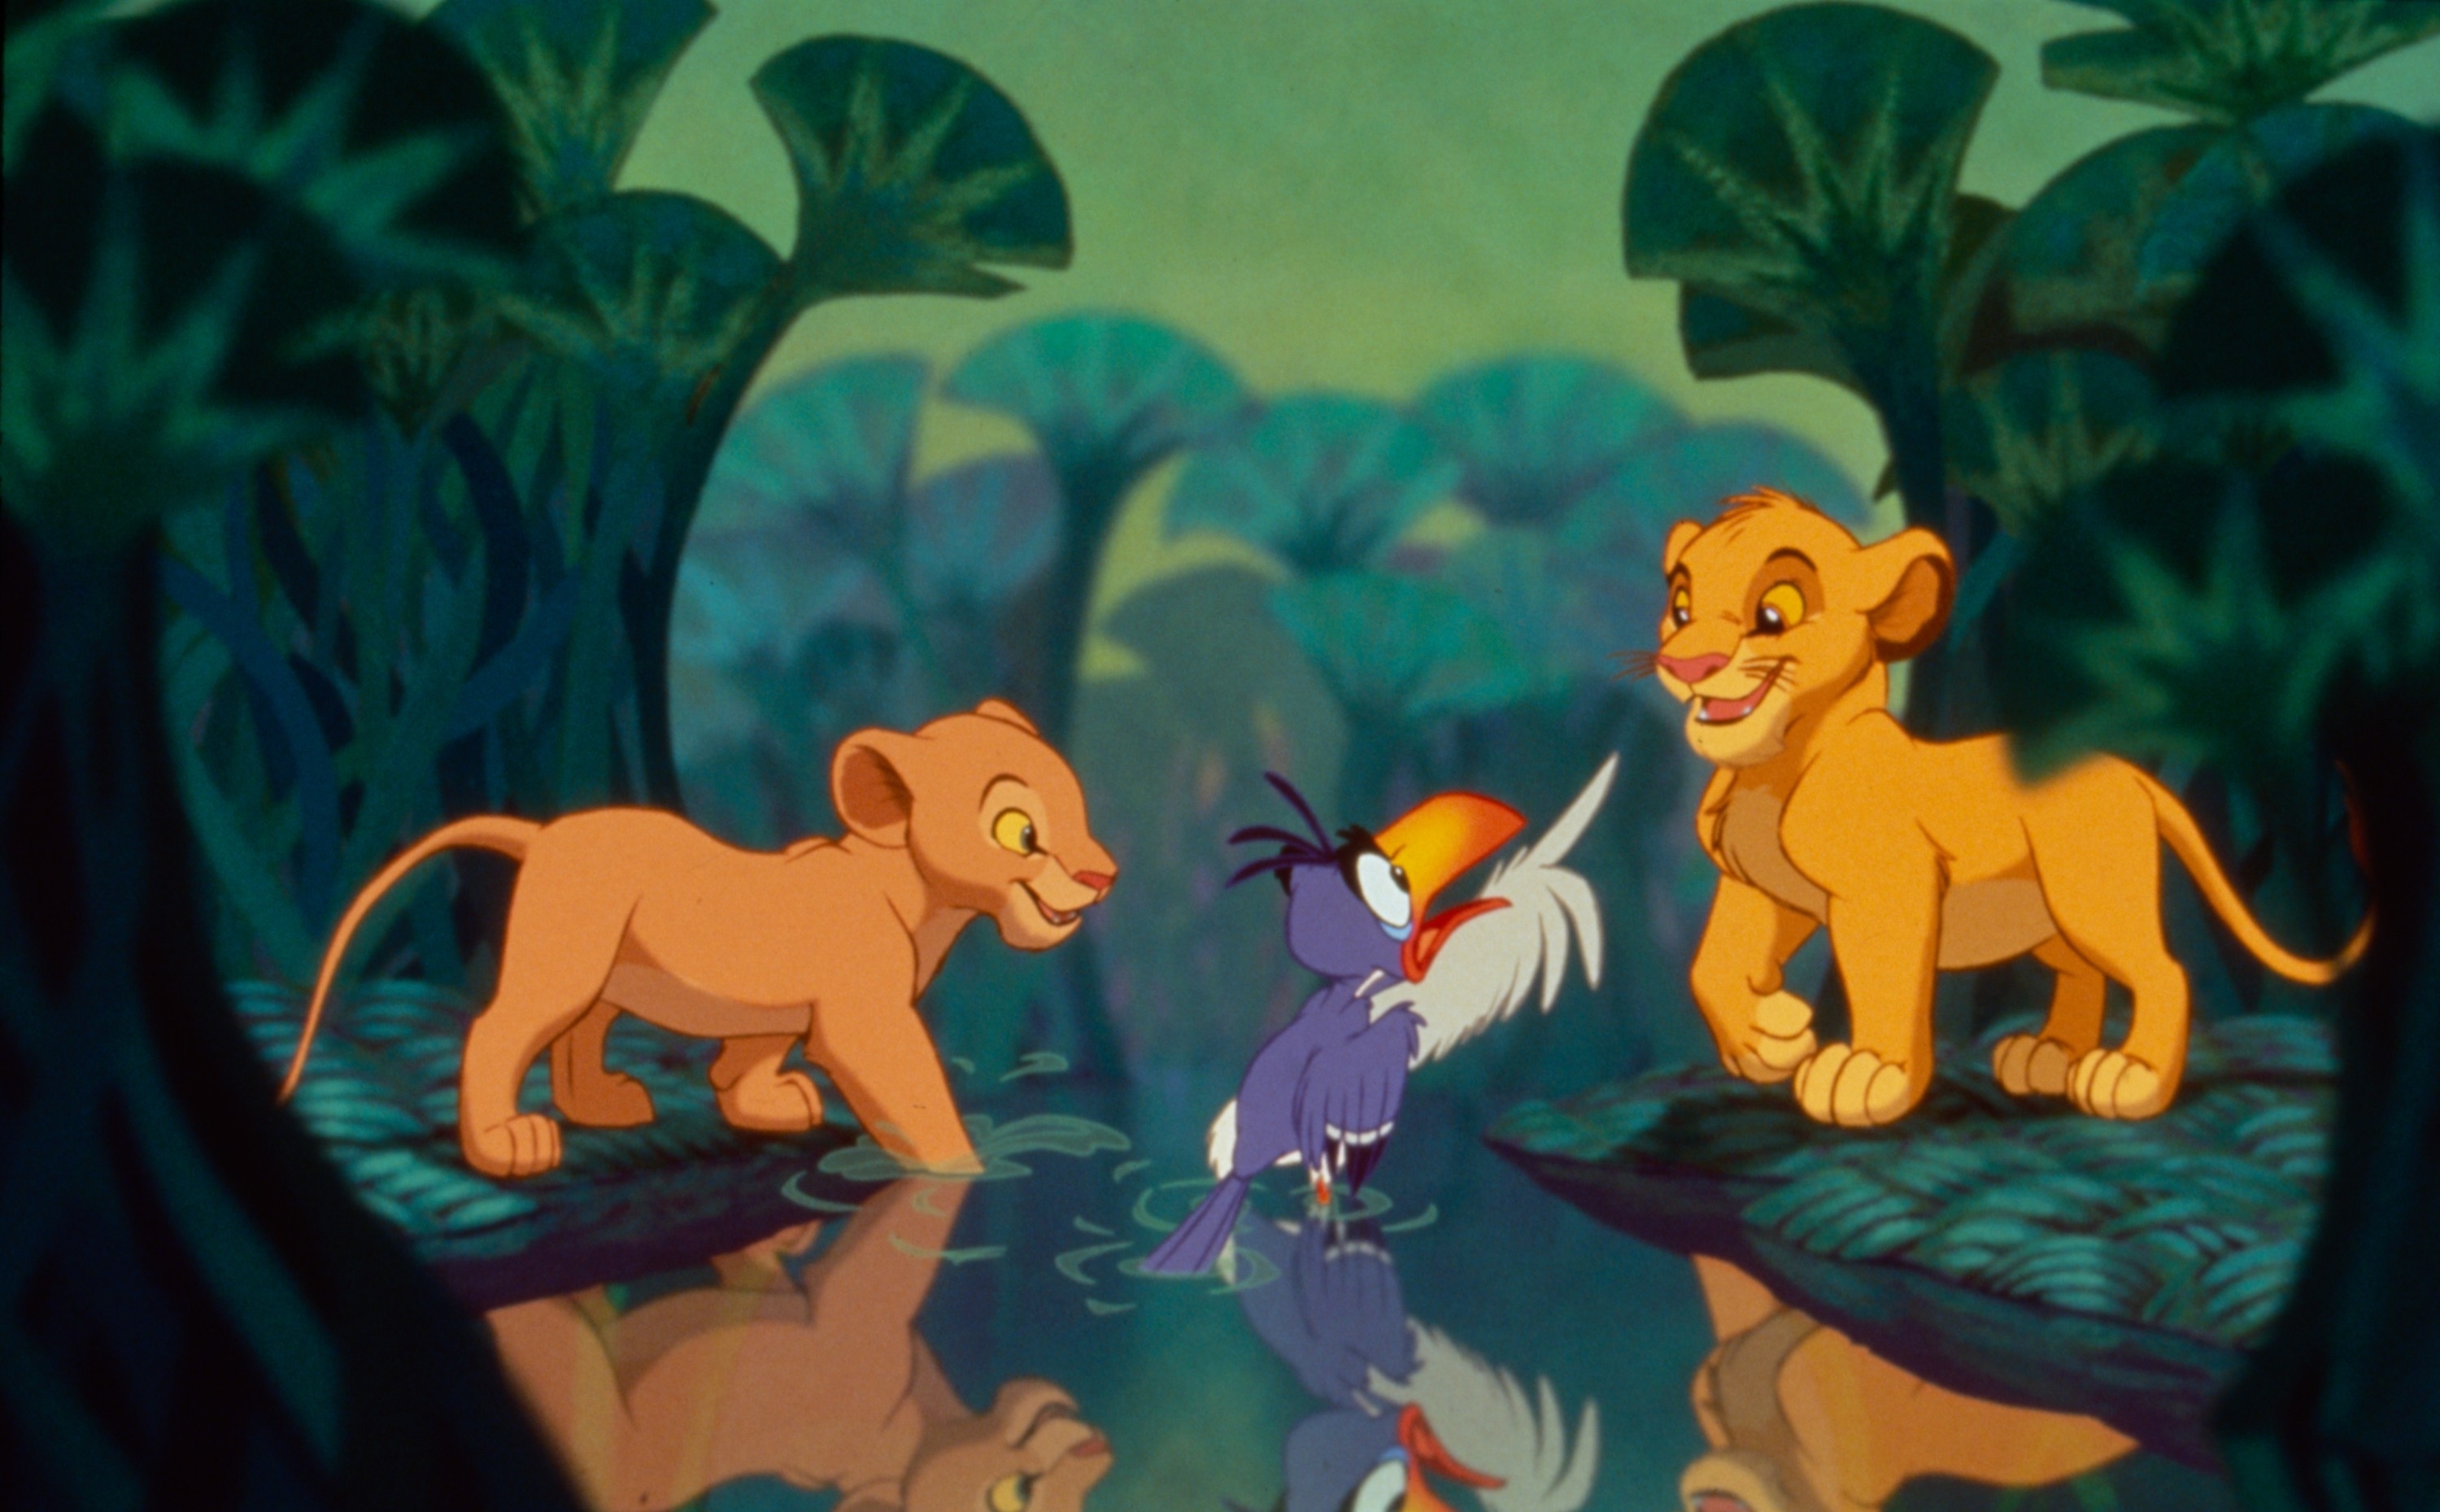 Animated characters Simba, Nala, and Zazu from &quot;The Lion King&quot; in a jungle scene